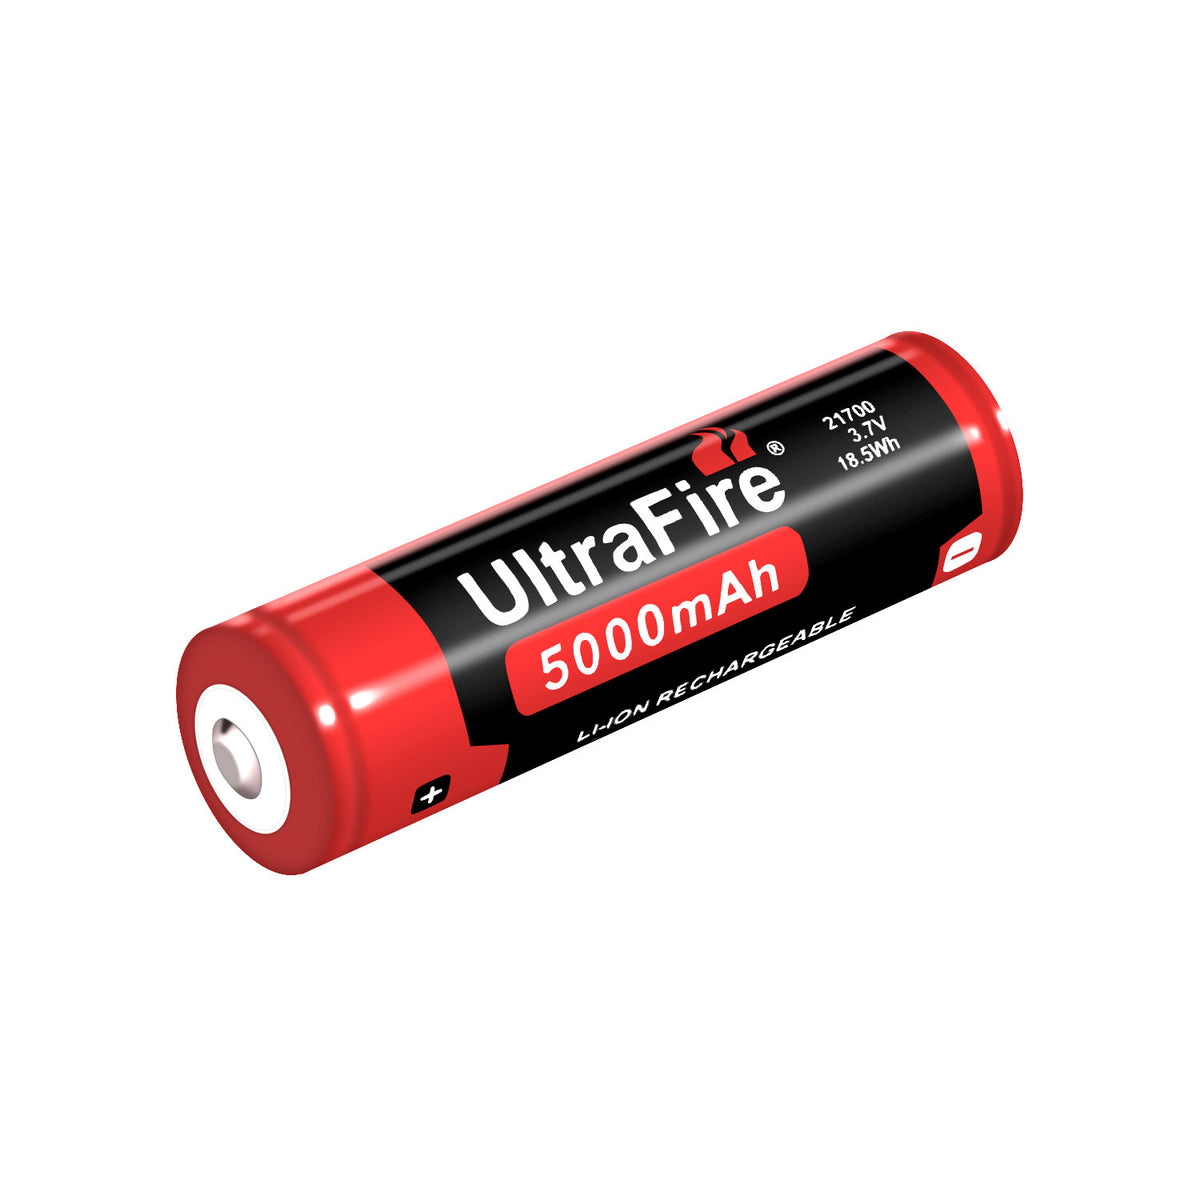 UltraFire 5000mAh 3.7V 21700 Rechargeable Lithium Battery With Protection Board (2PCS)